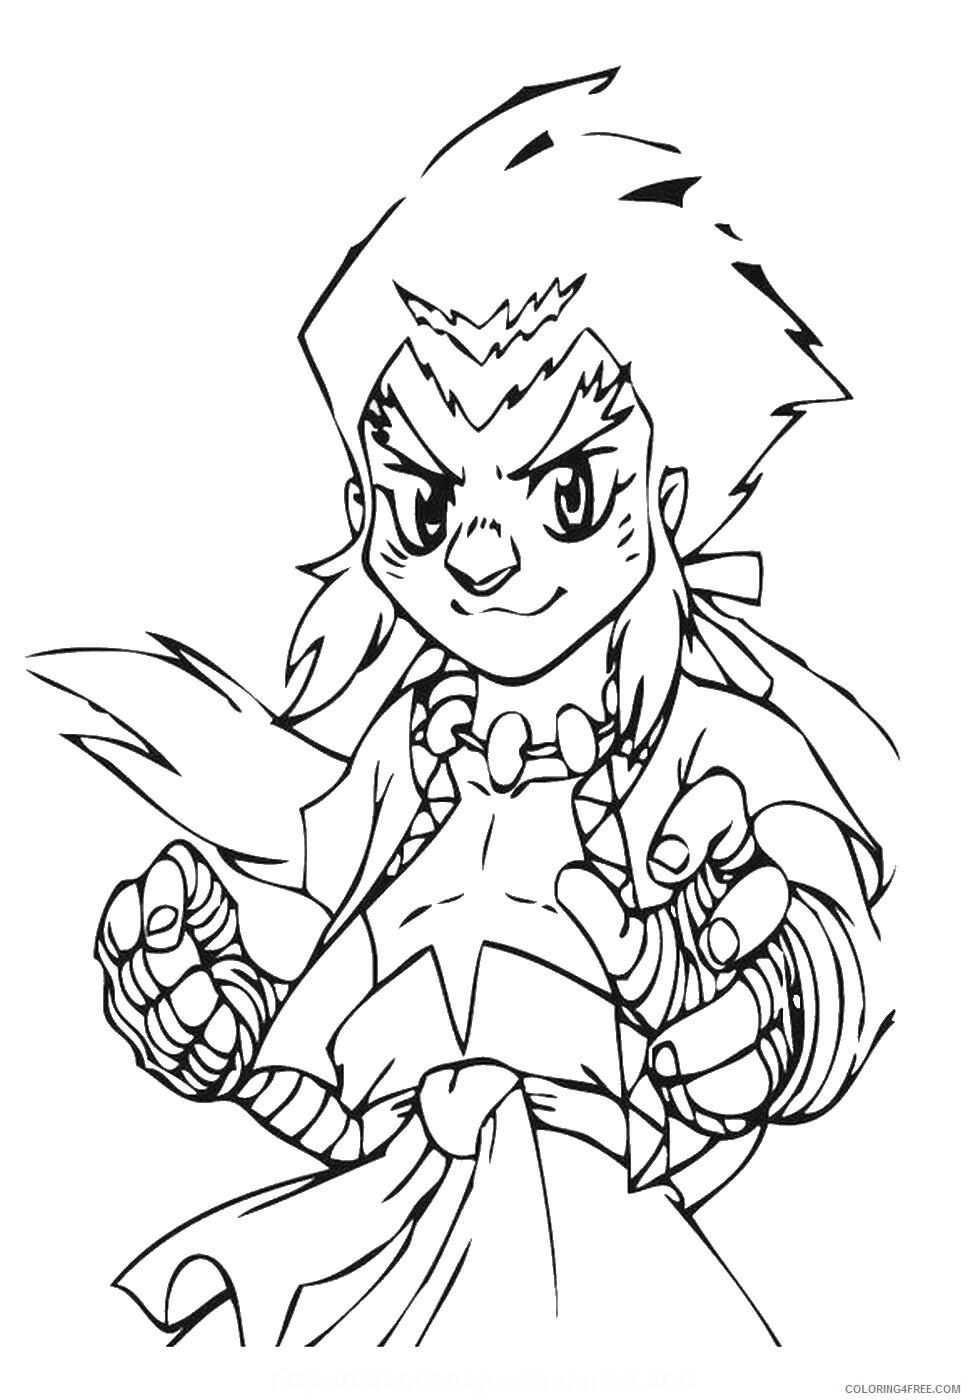 Beyblade Coloring Pages Anime beyblade_cl_21 Printable 2021 008 Coloring4free